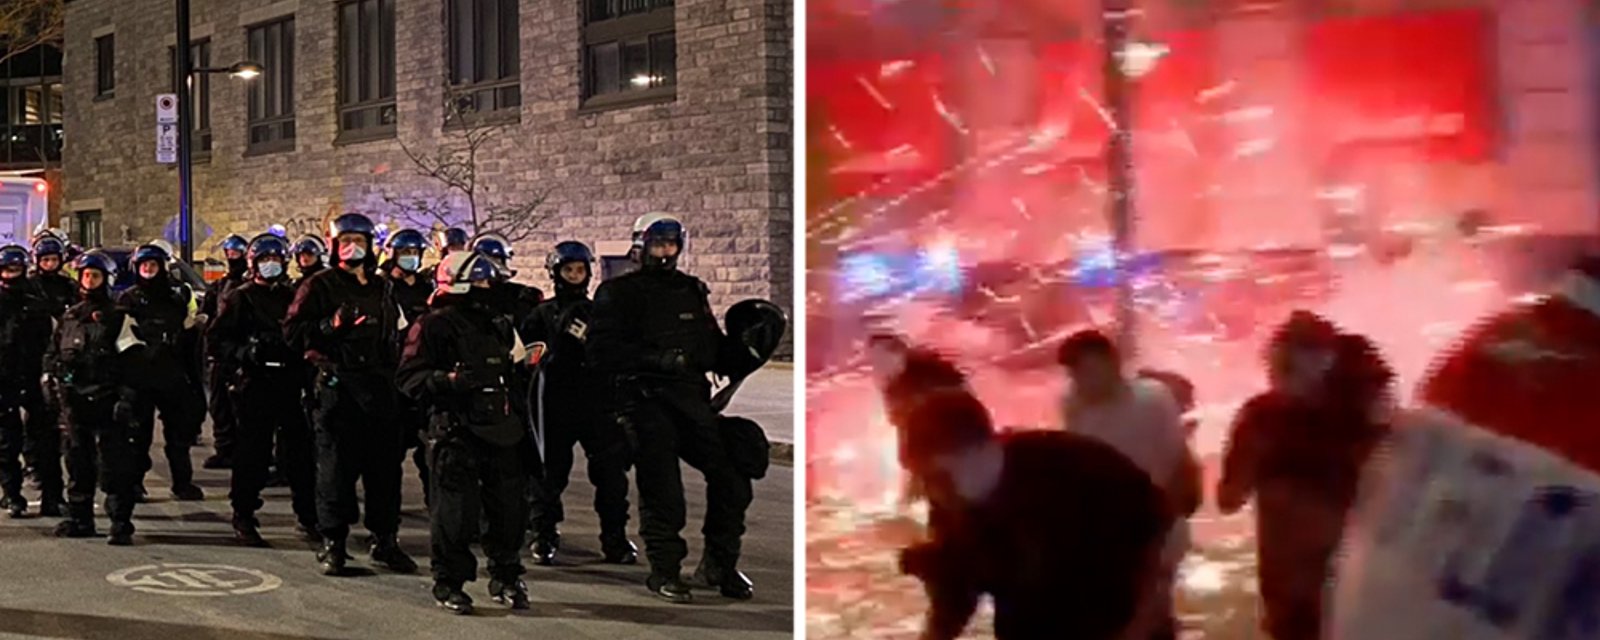 Riot police called in after Habs fans go wild in the streets